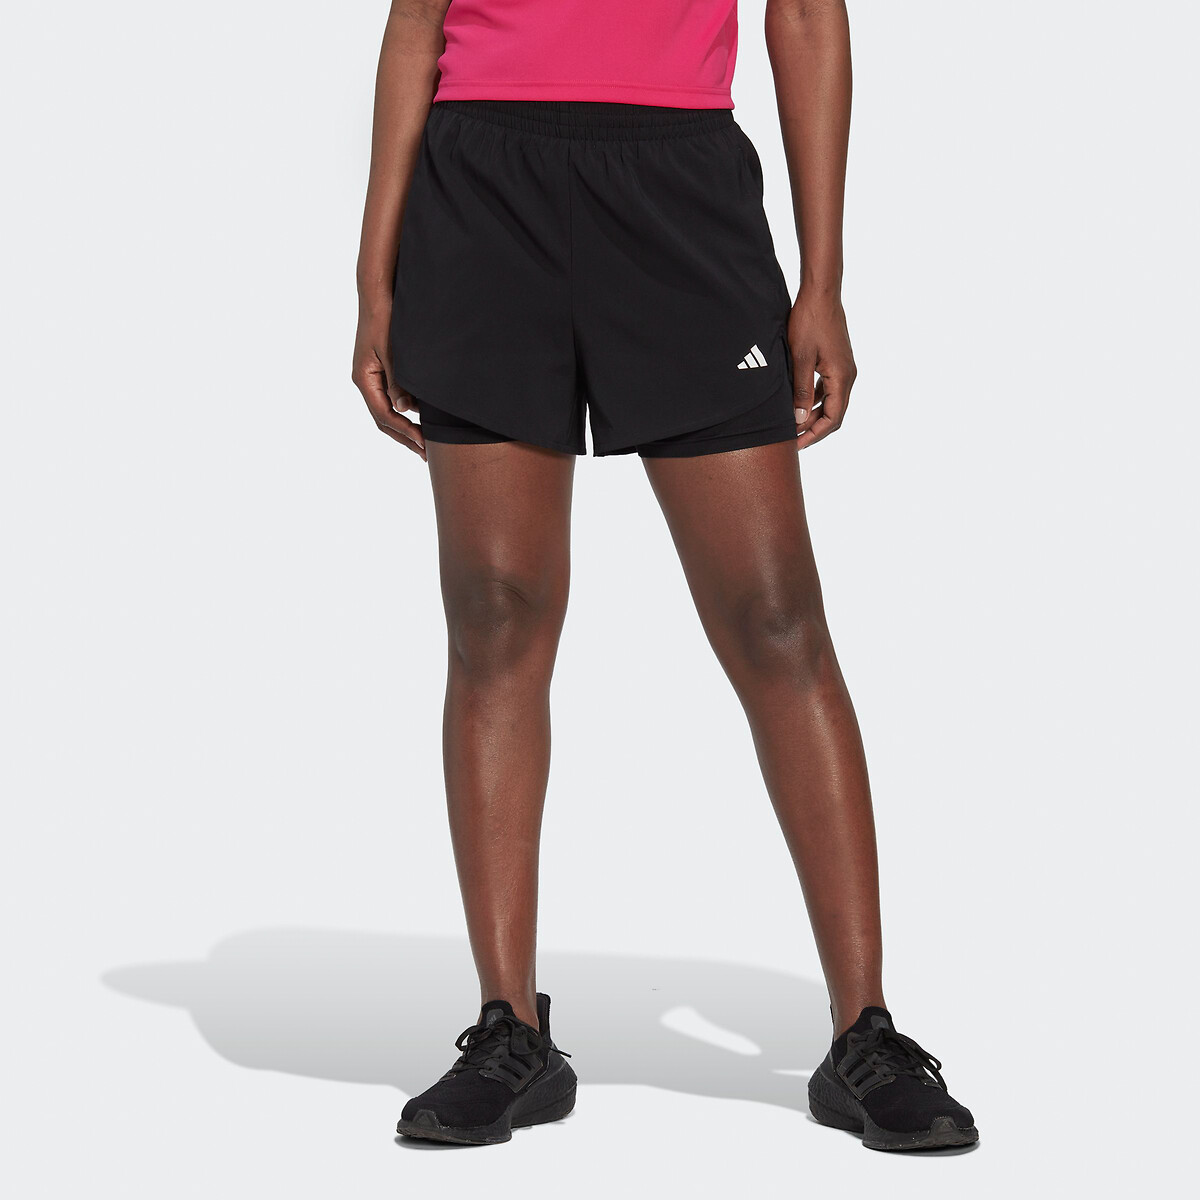 Image of Aeroready Made for Training 2-in-1 Shorts